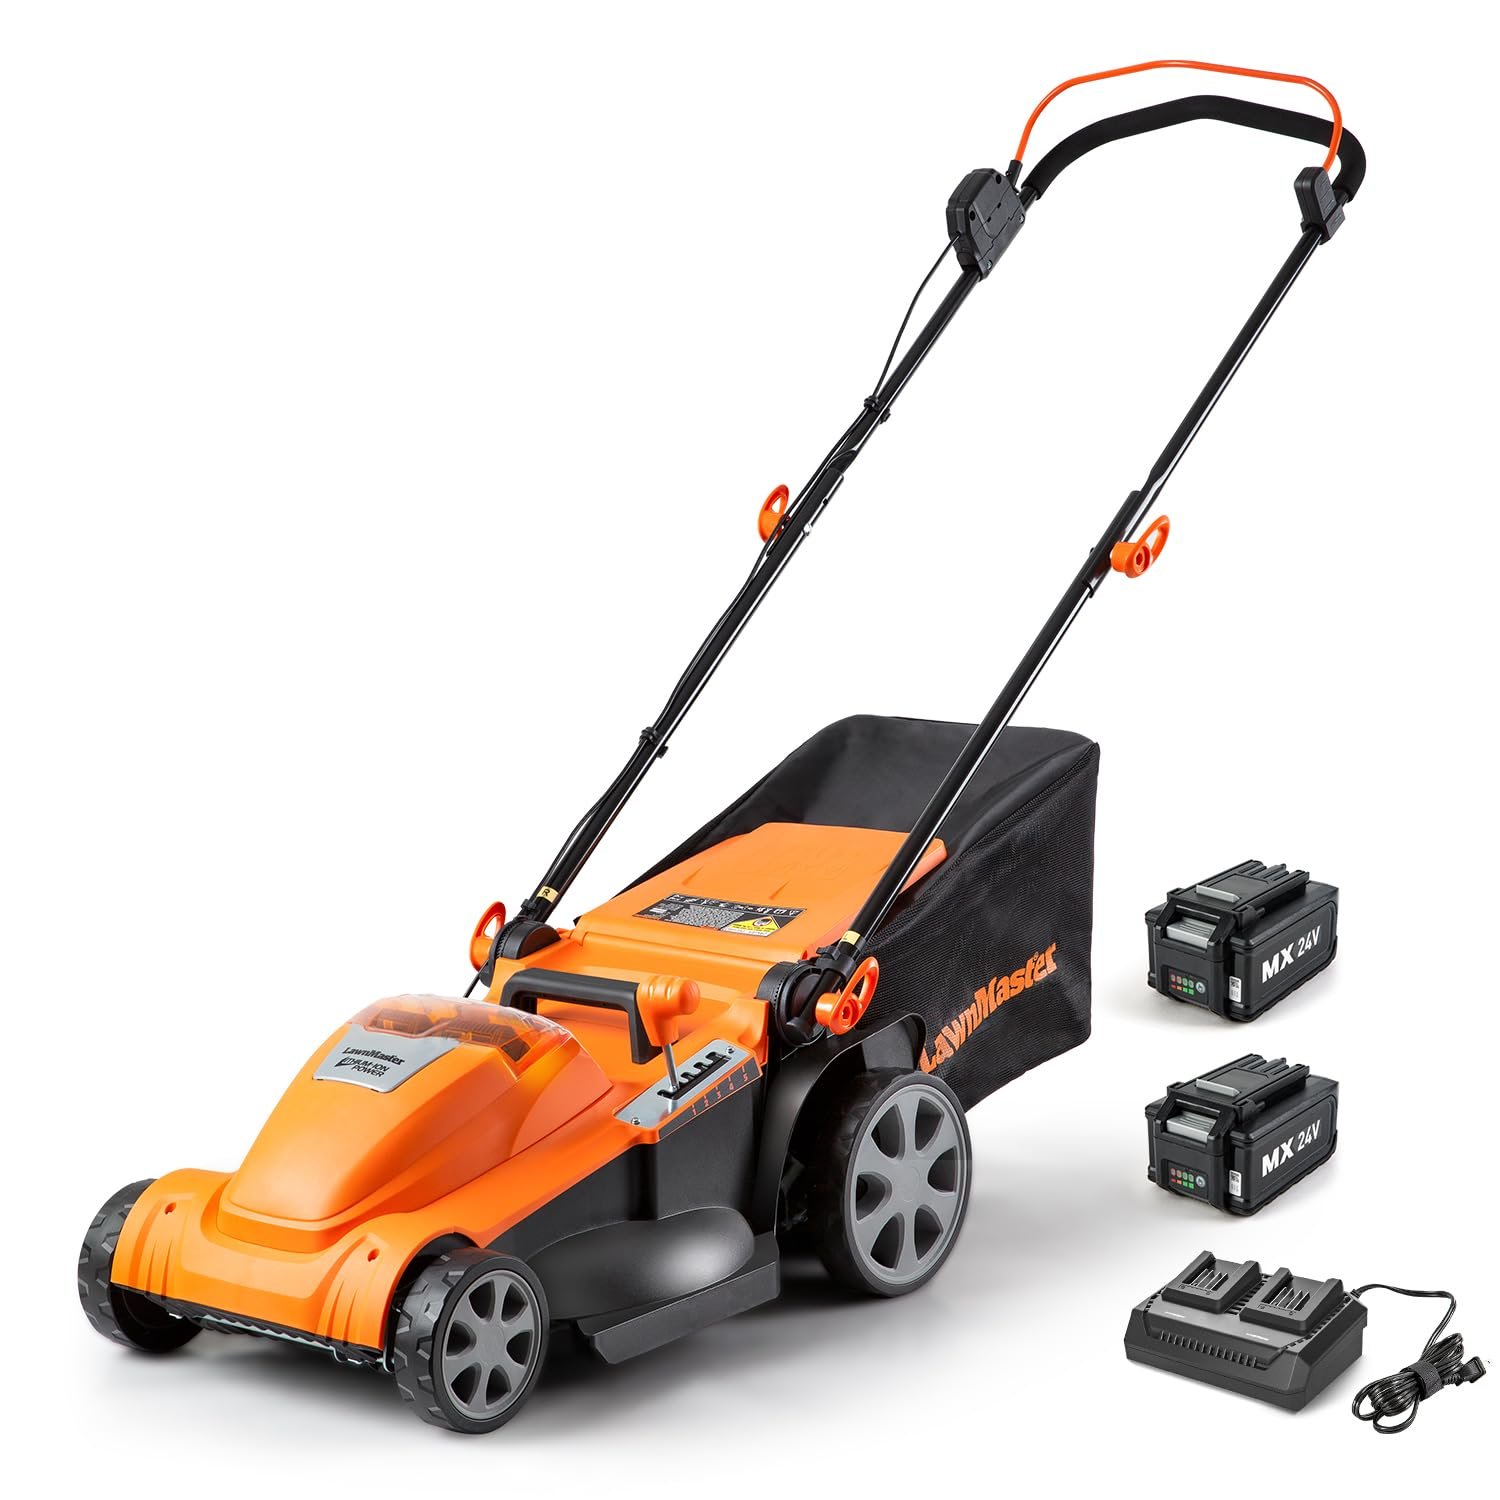 LawnMaster CLMF4817E cordless lawnmower